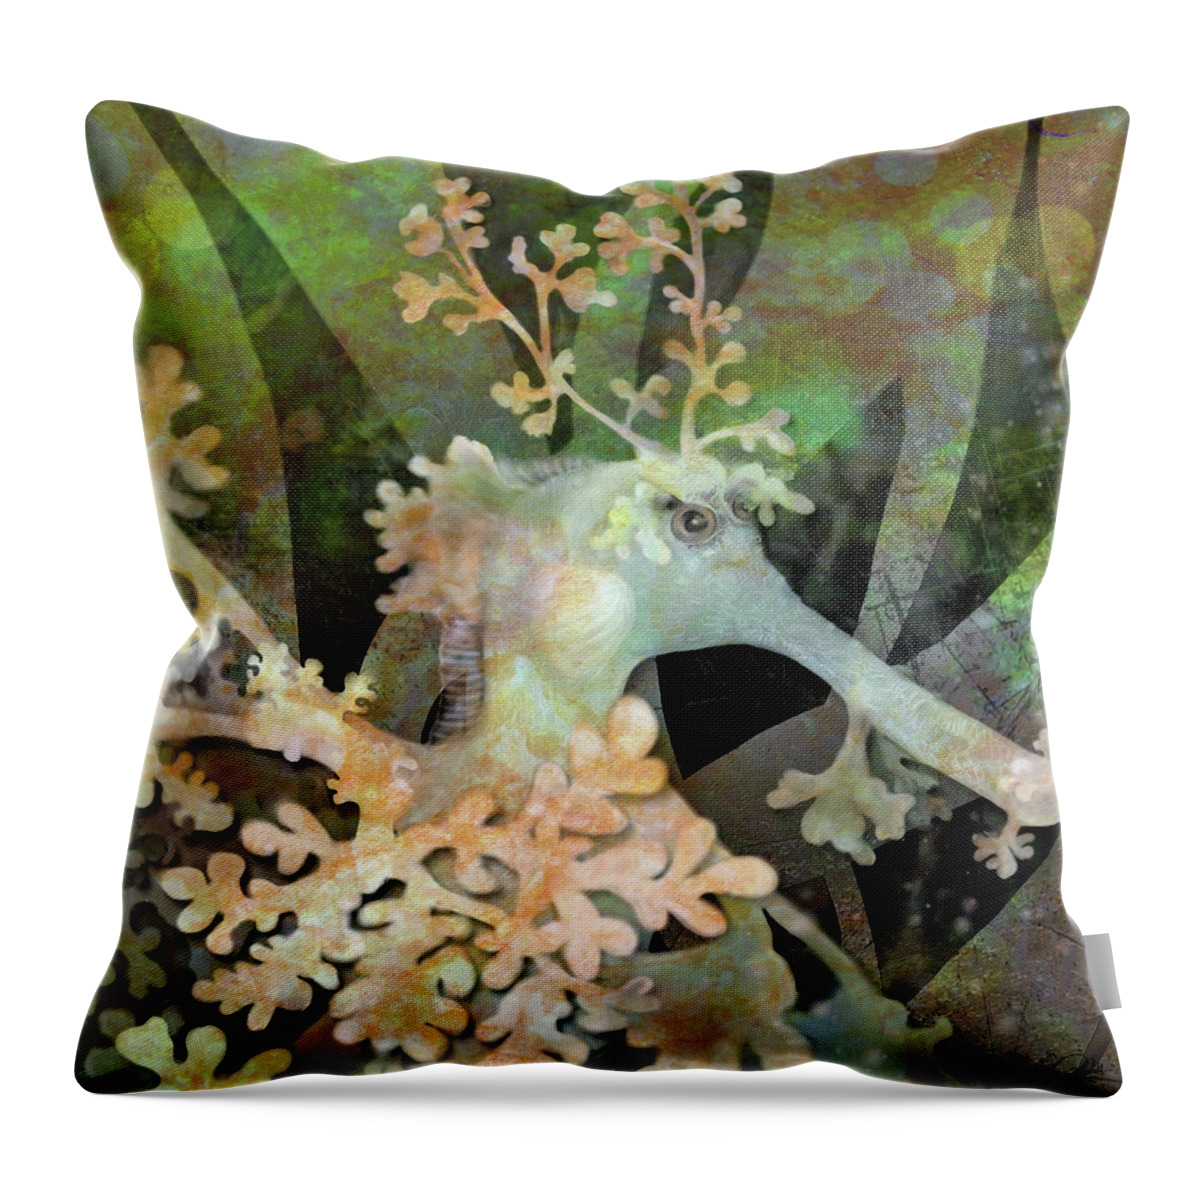 Seadragon Throw Pillow featuring the digital art Teal Leafy Sea Dragon by Sand And Chi